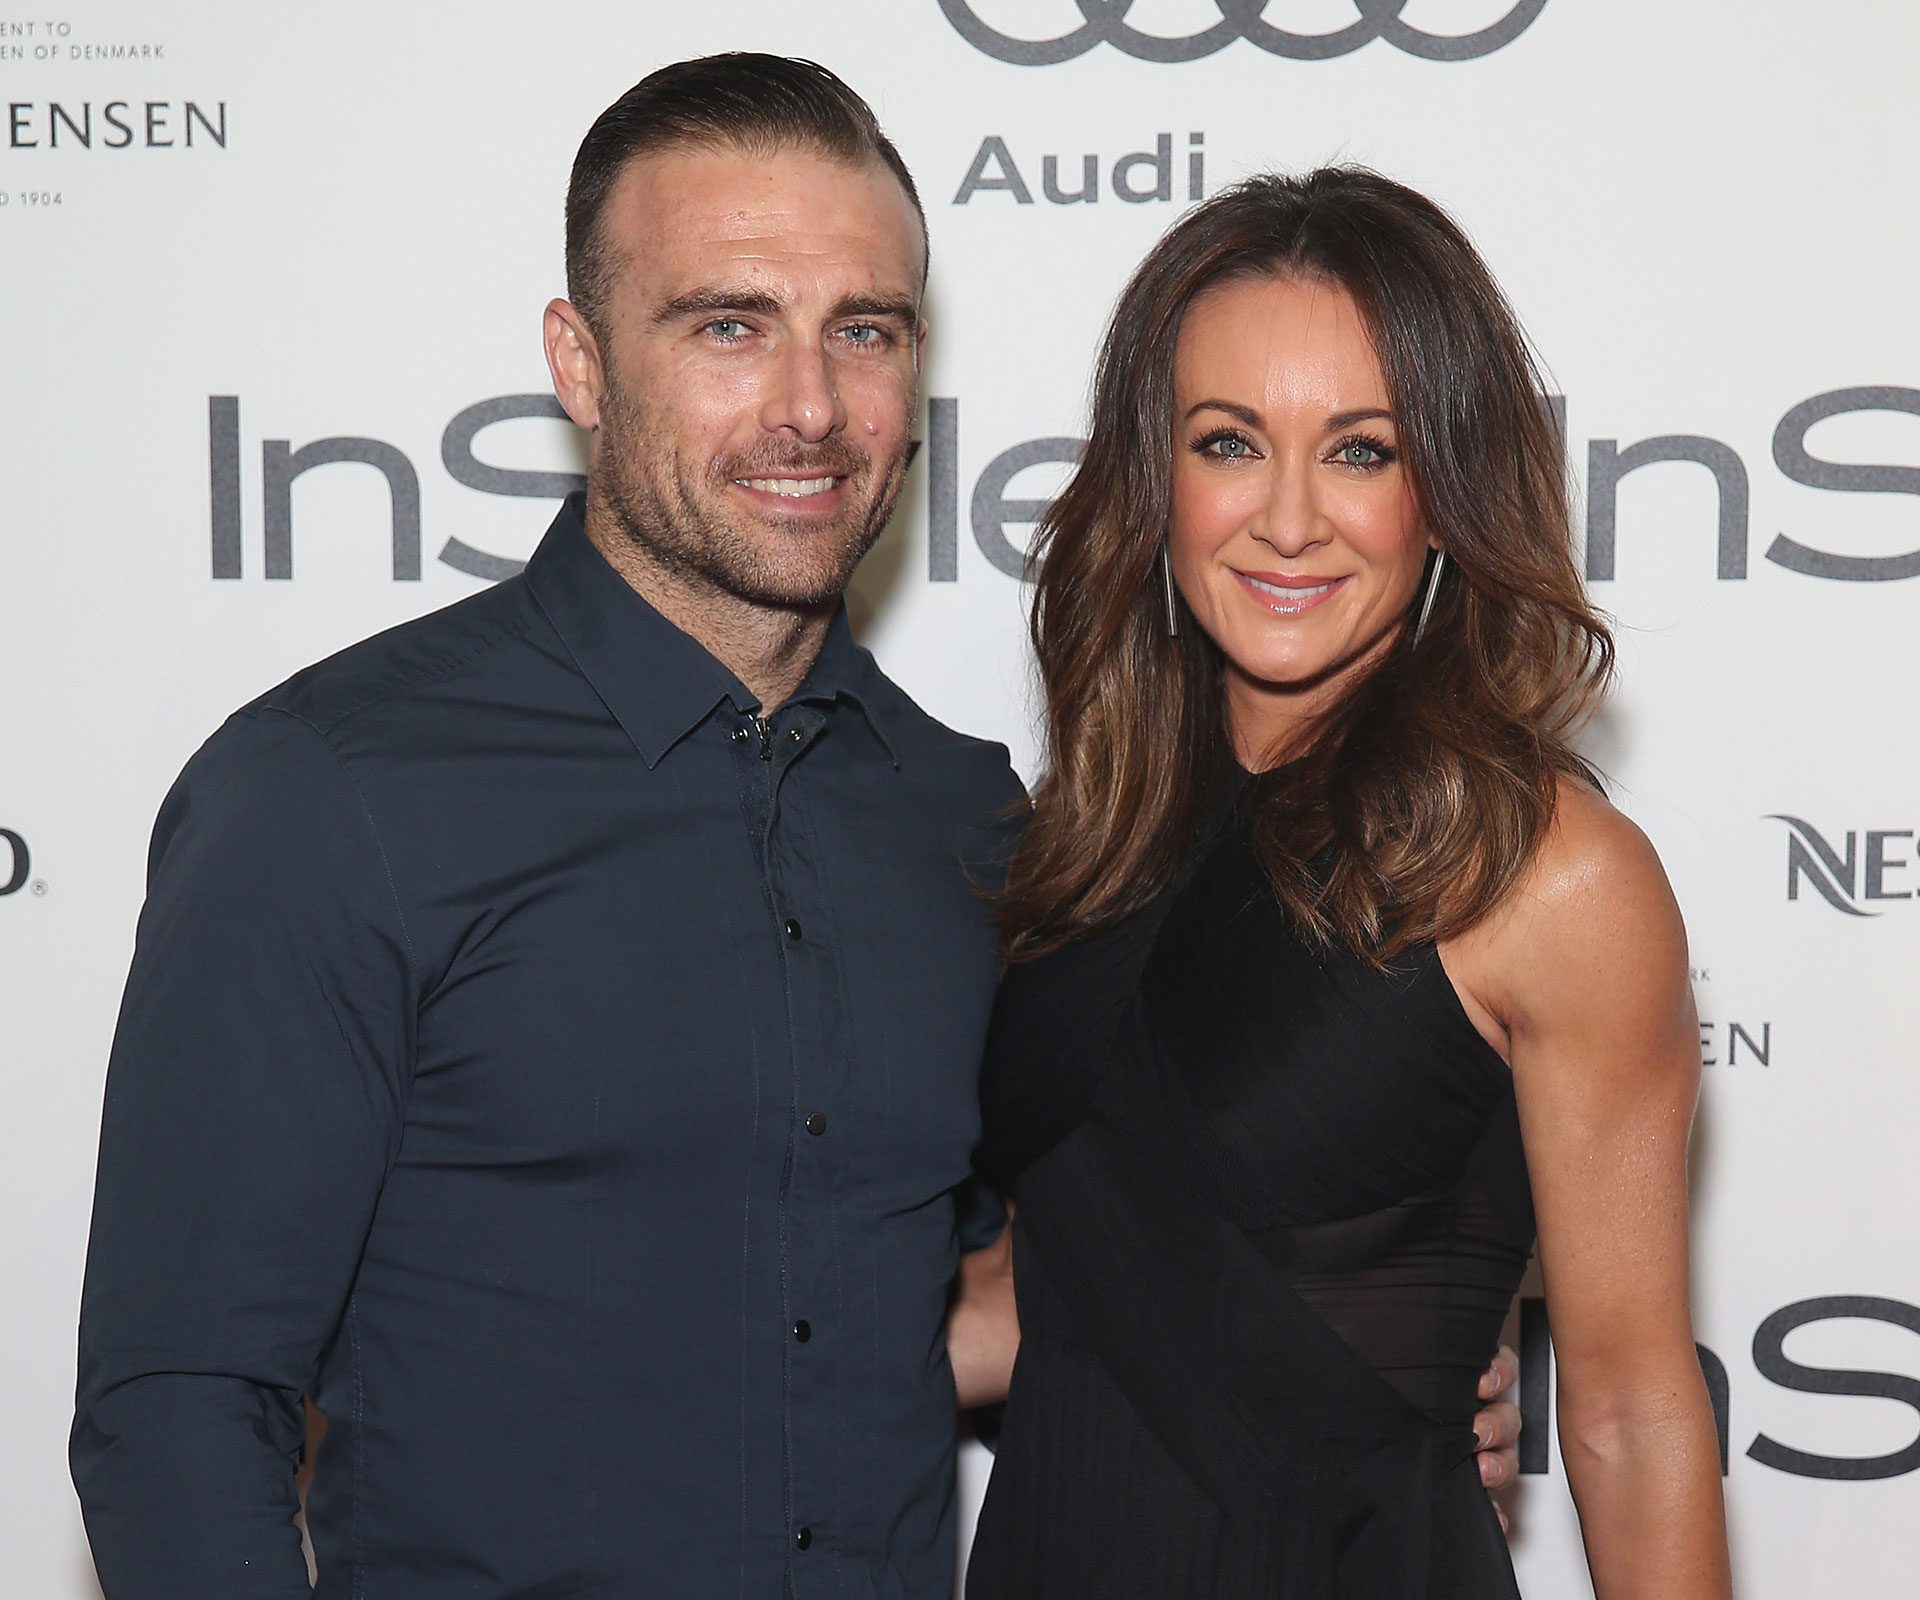 Michelle Bridges ‘expecting first child’ with Commando